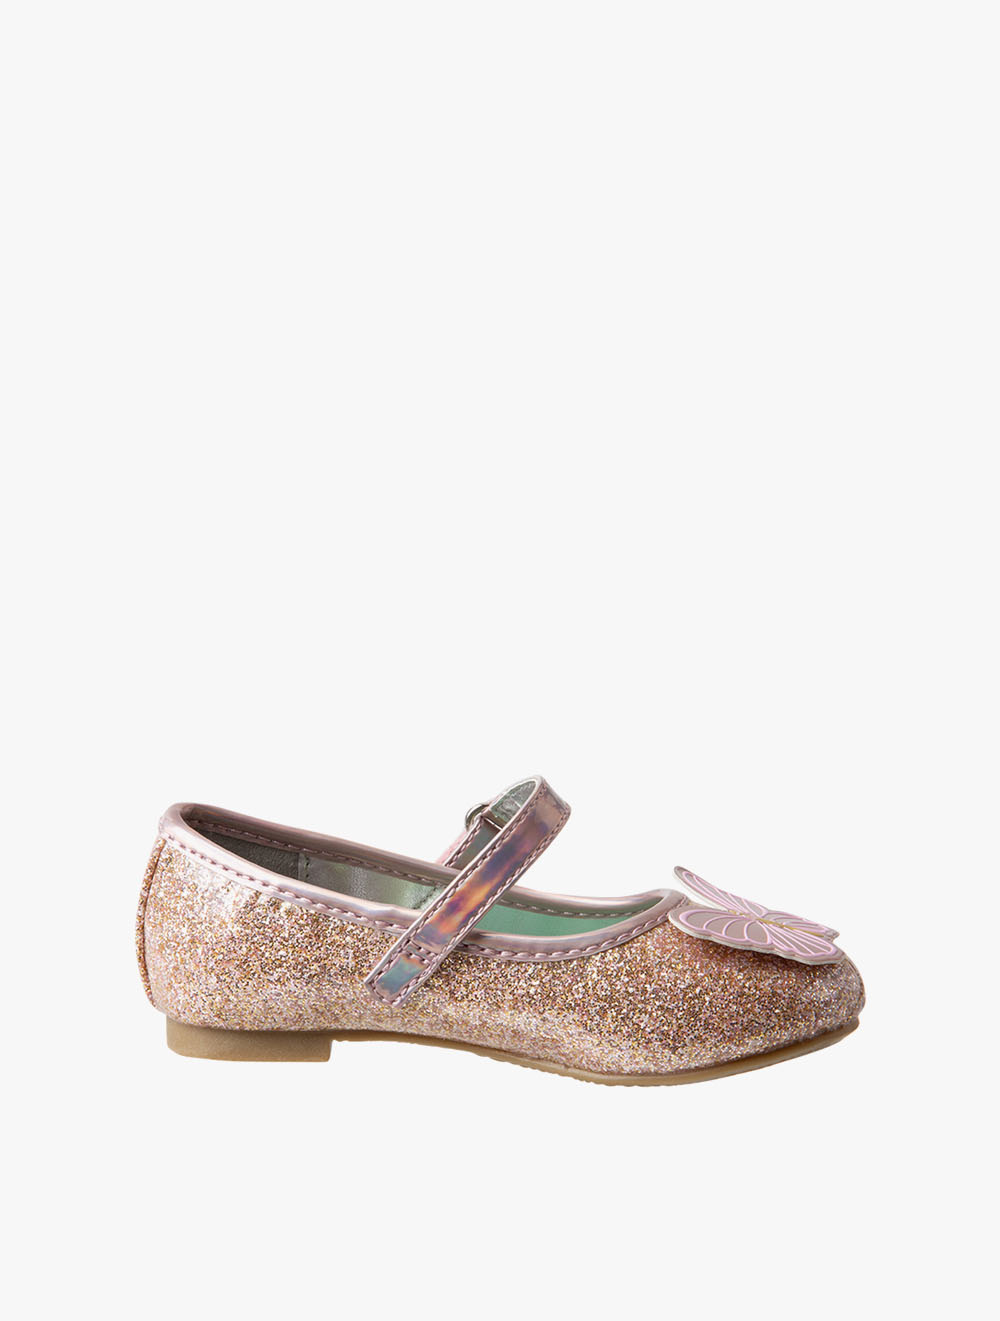 Payless Character Childrens Princess Flat - Rose Gold_07